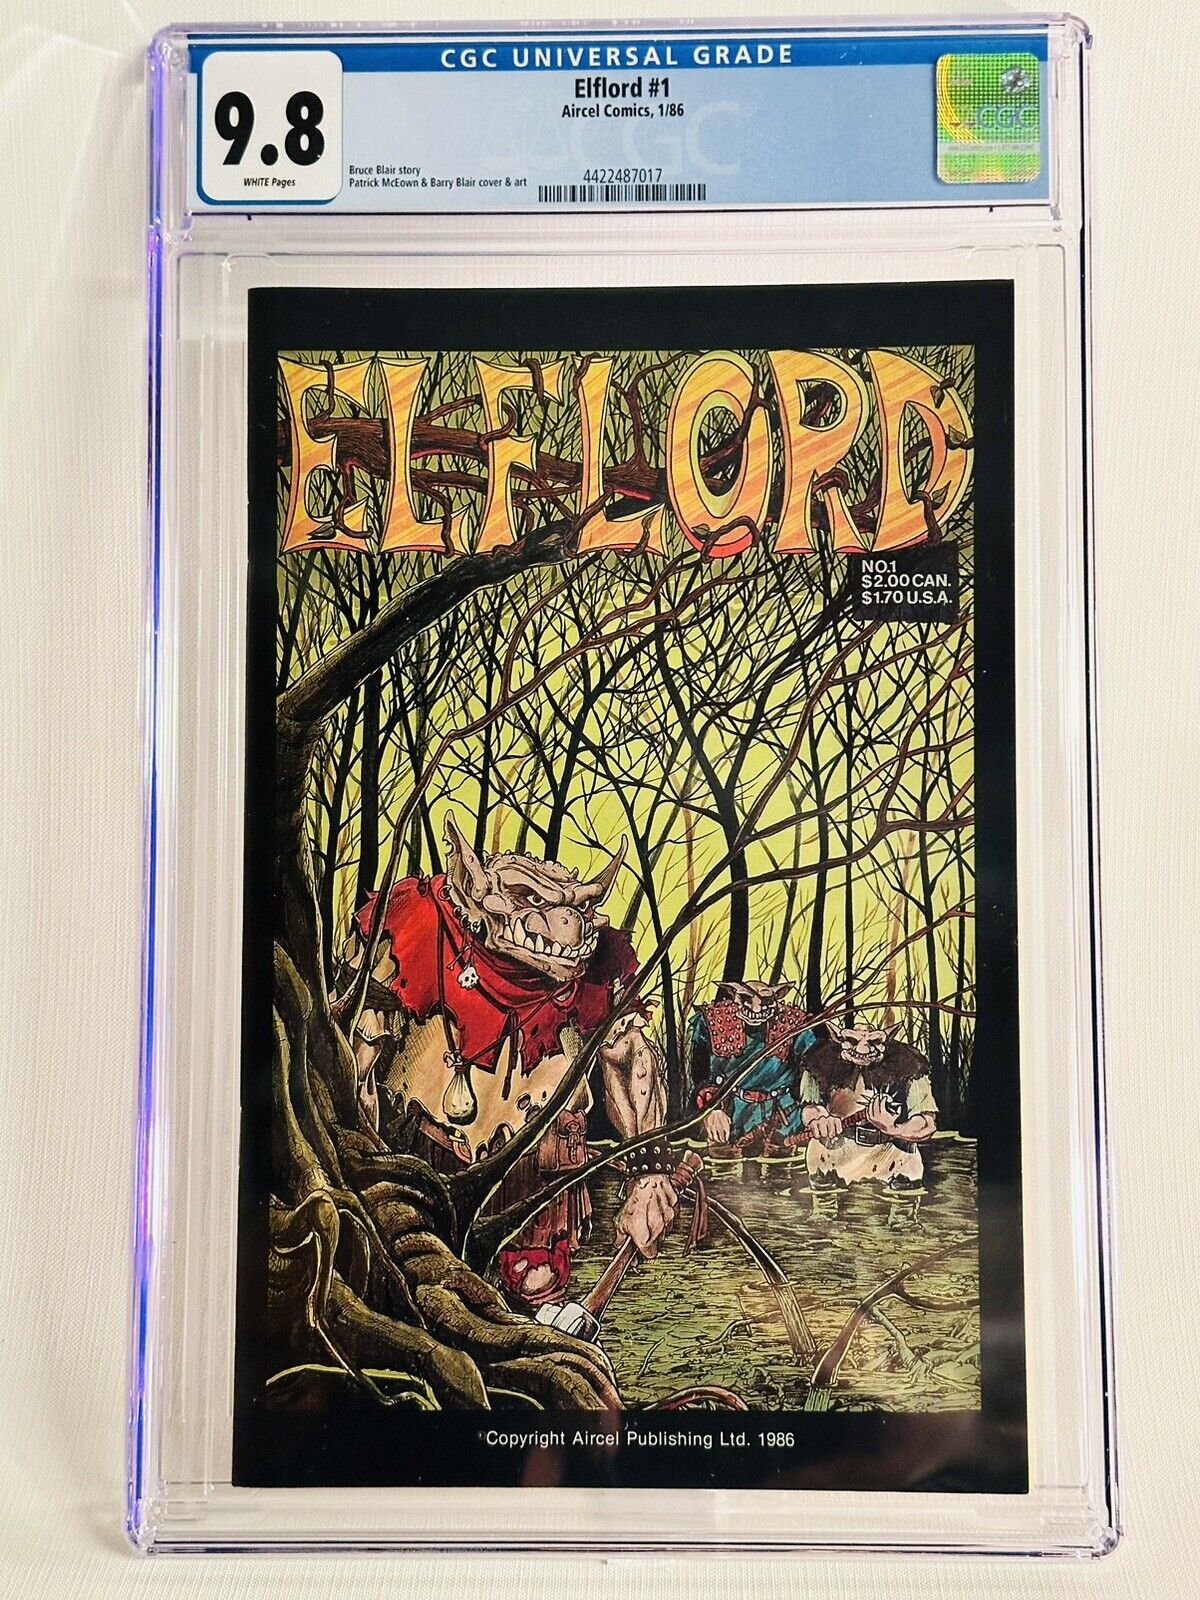 ELFLORD 1 CGC 9.8 RARE NM+ Aircel Comics 1986 1ST BARRY BLAIR WORK 1 Of 4 Census